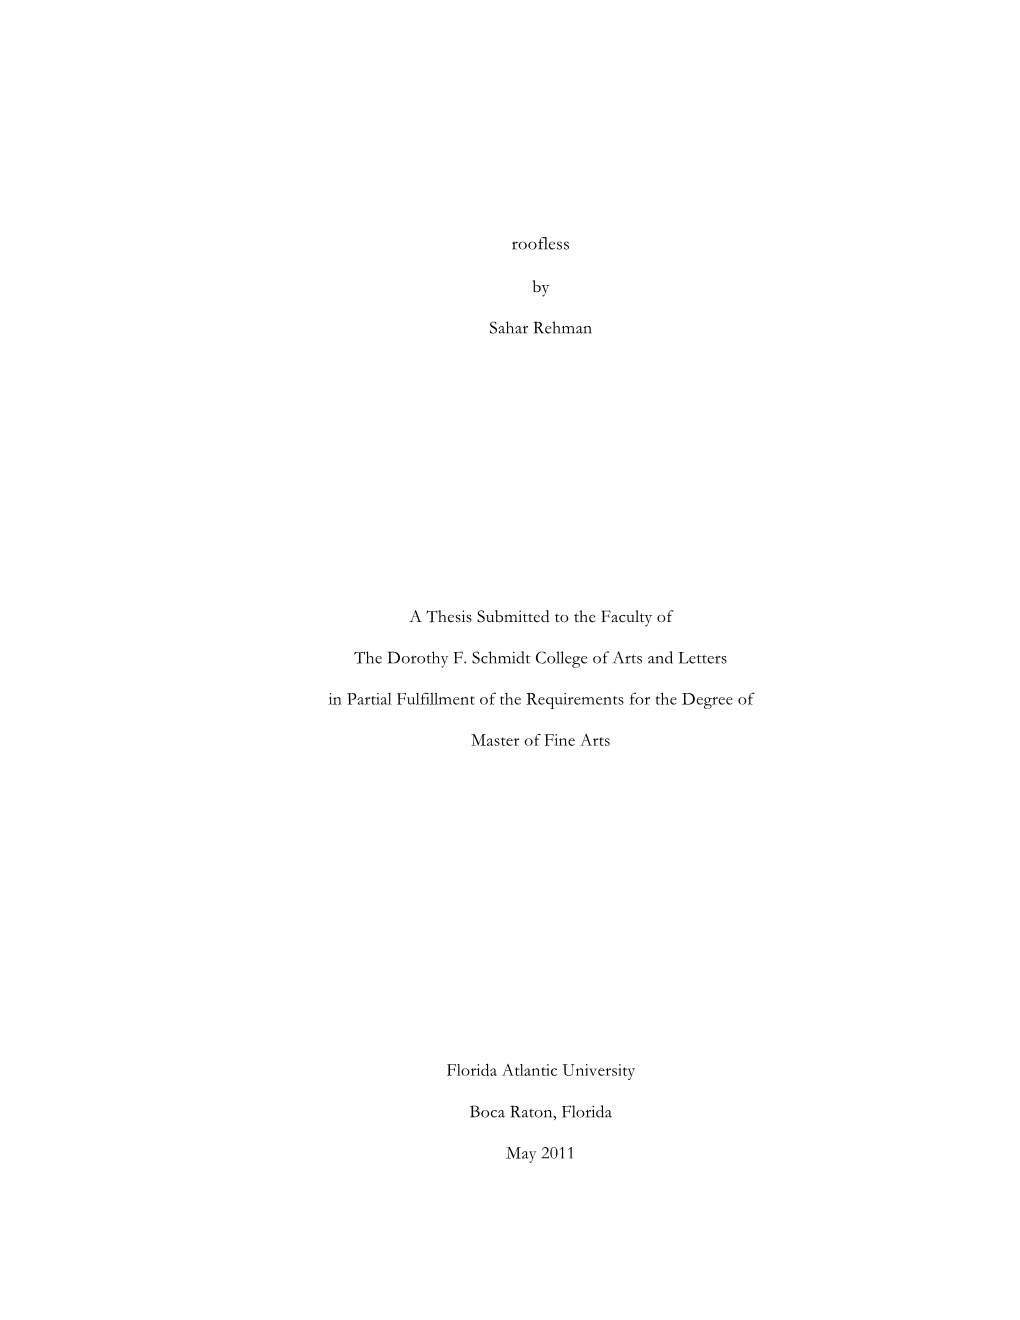 Roofless by Sahar Rehman a Thesis Submitted to the Faculty of The